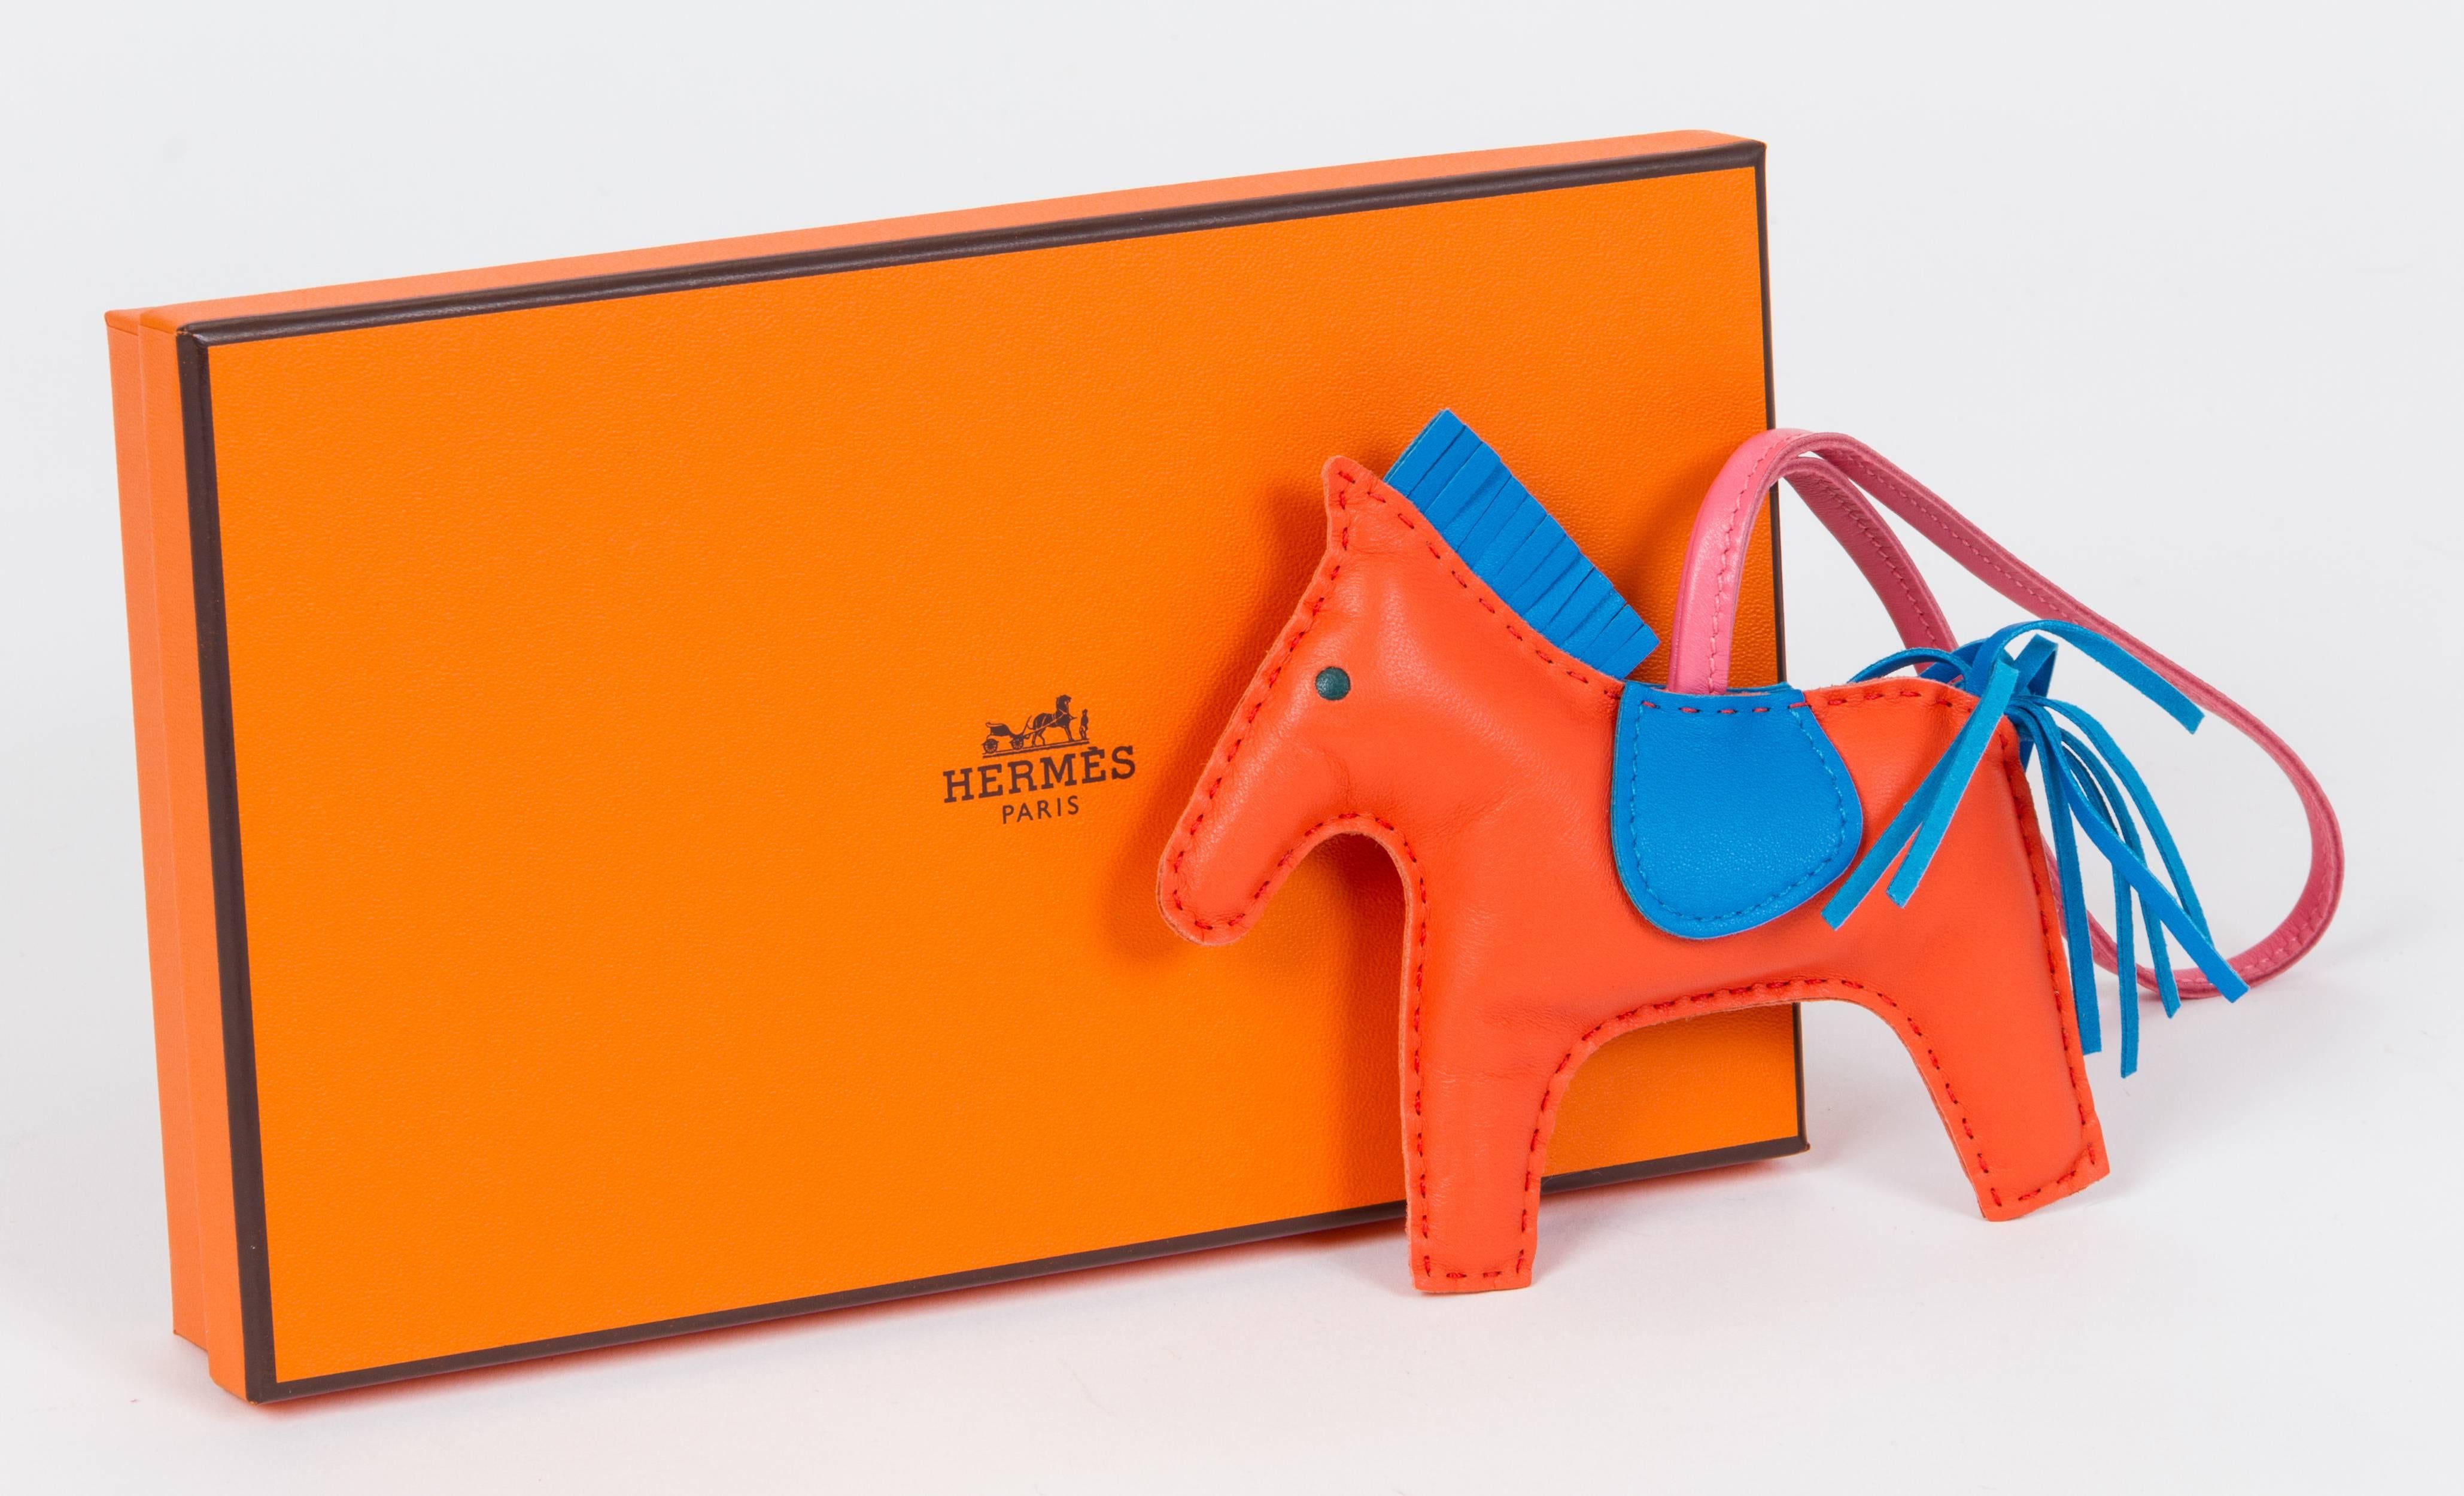 Hermes rare and collectible grigri rodeo bag charm MM (medium). Combination of rose azalea, orange poppy and blue Izmir. Brand new in box with ribbon and gift bag.